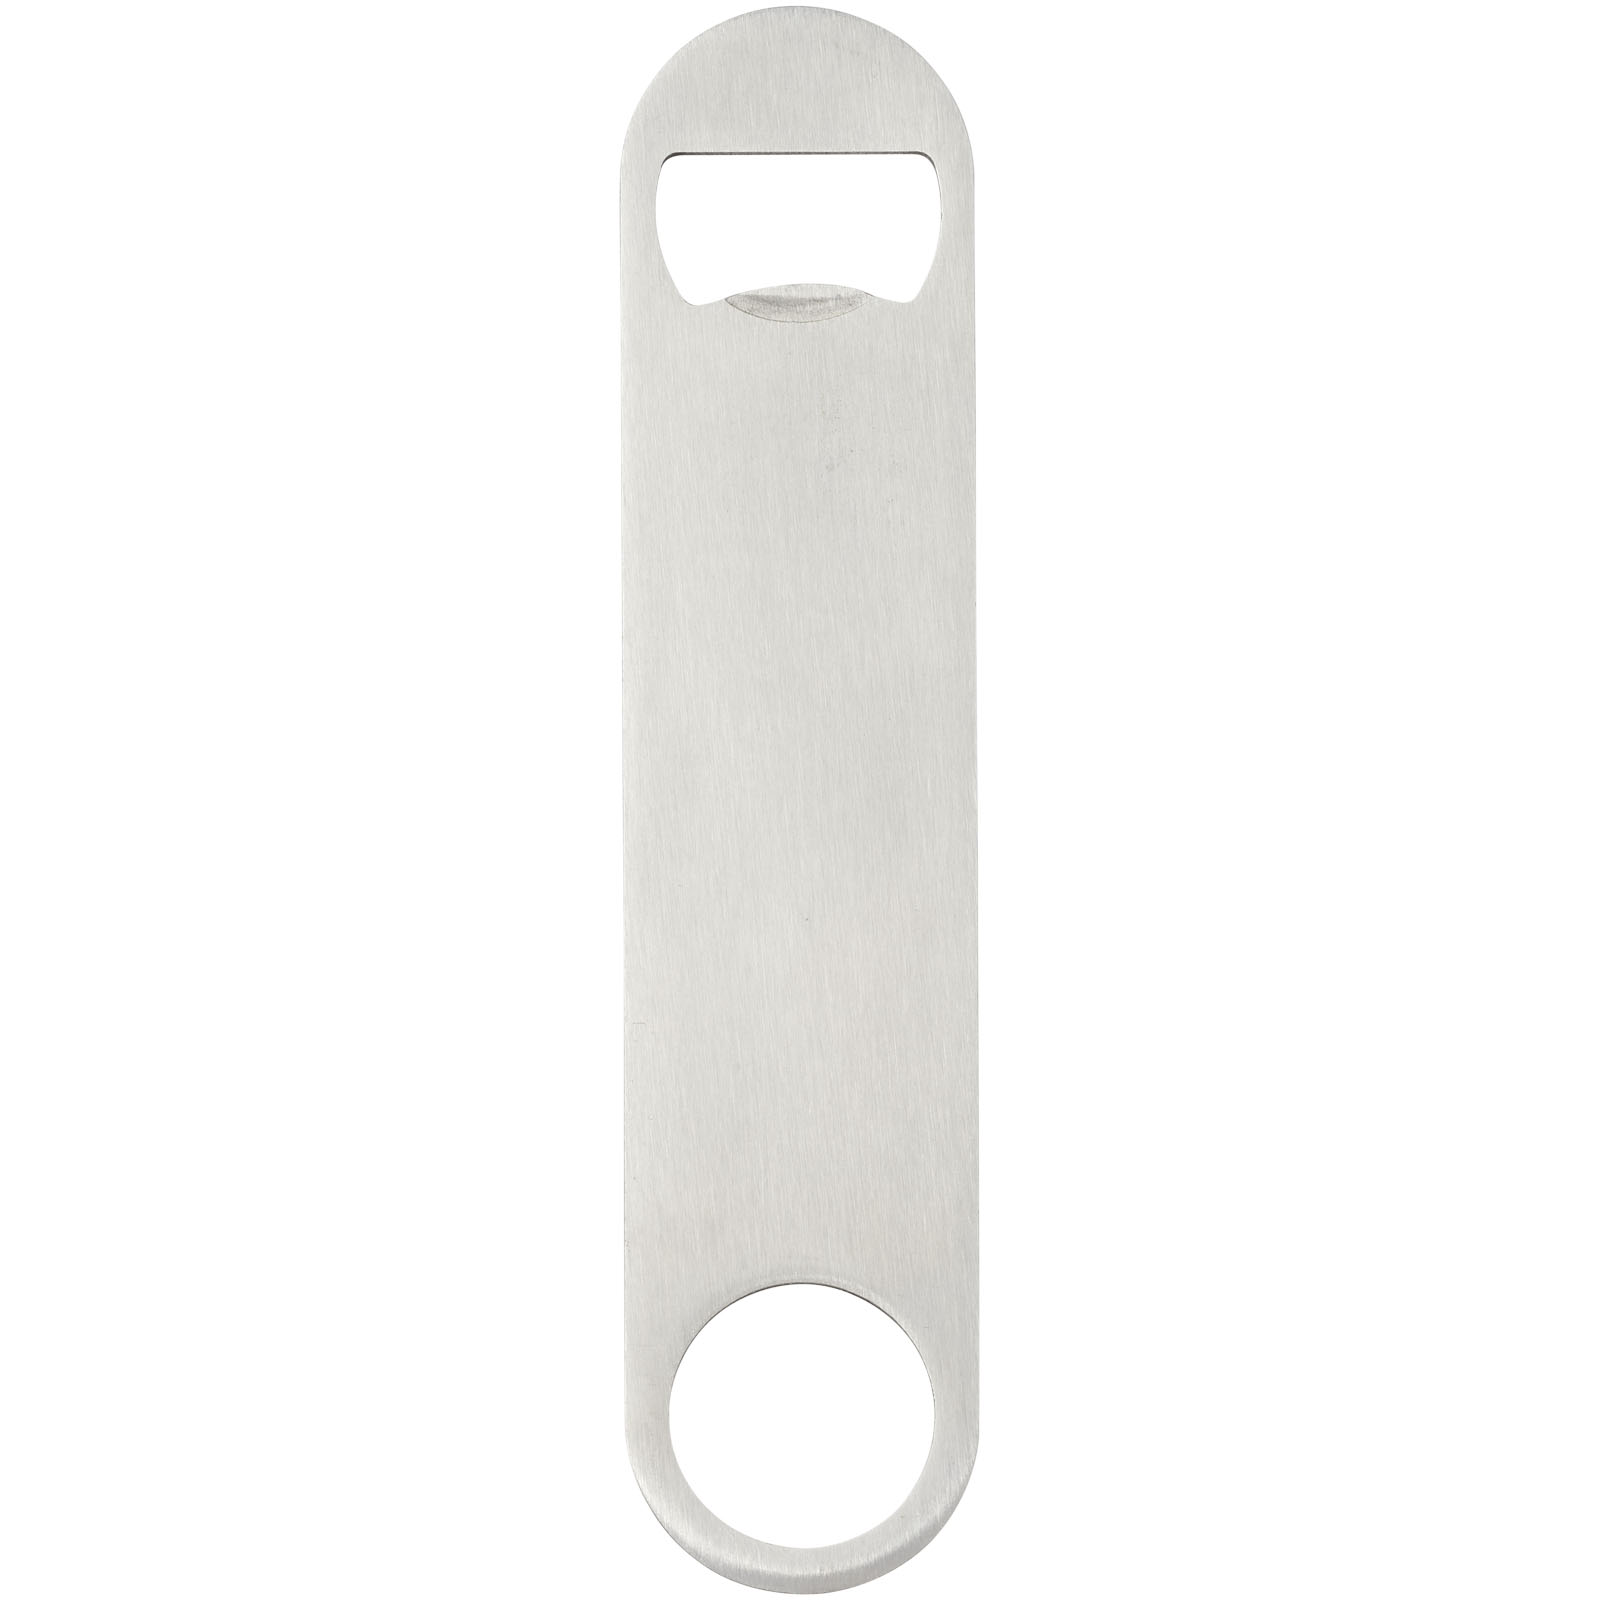 Advertising Bottle Openers & Accessories - Paddle bottle opener - 2